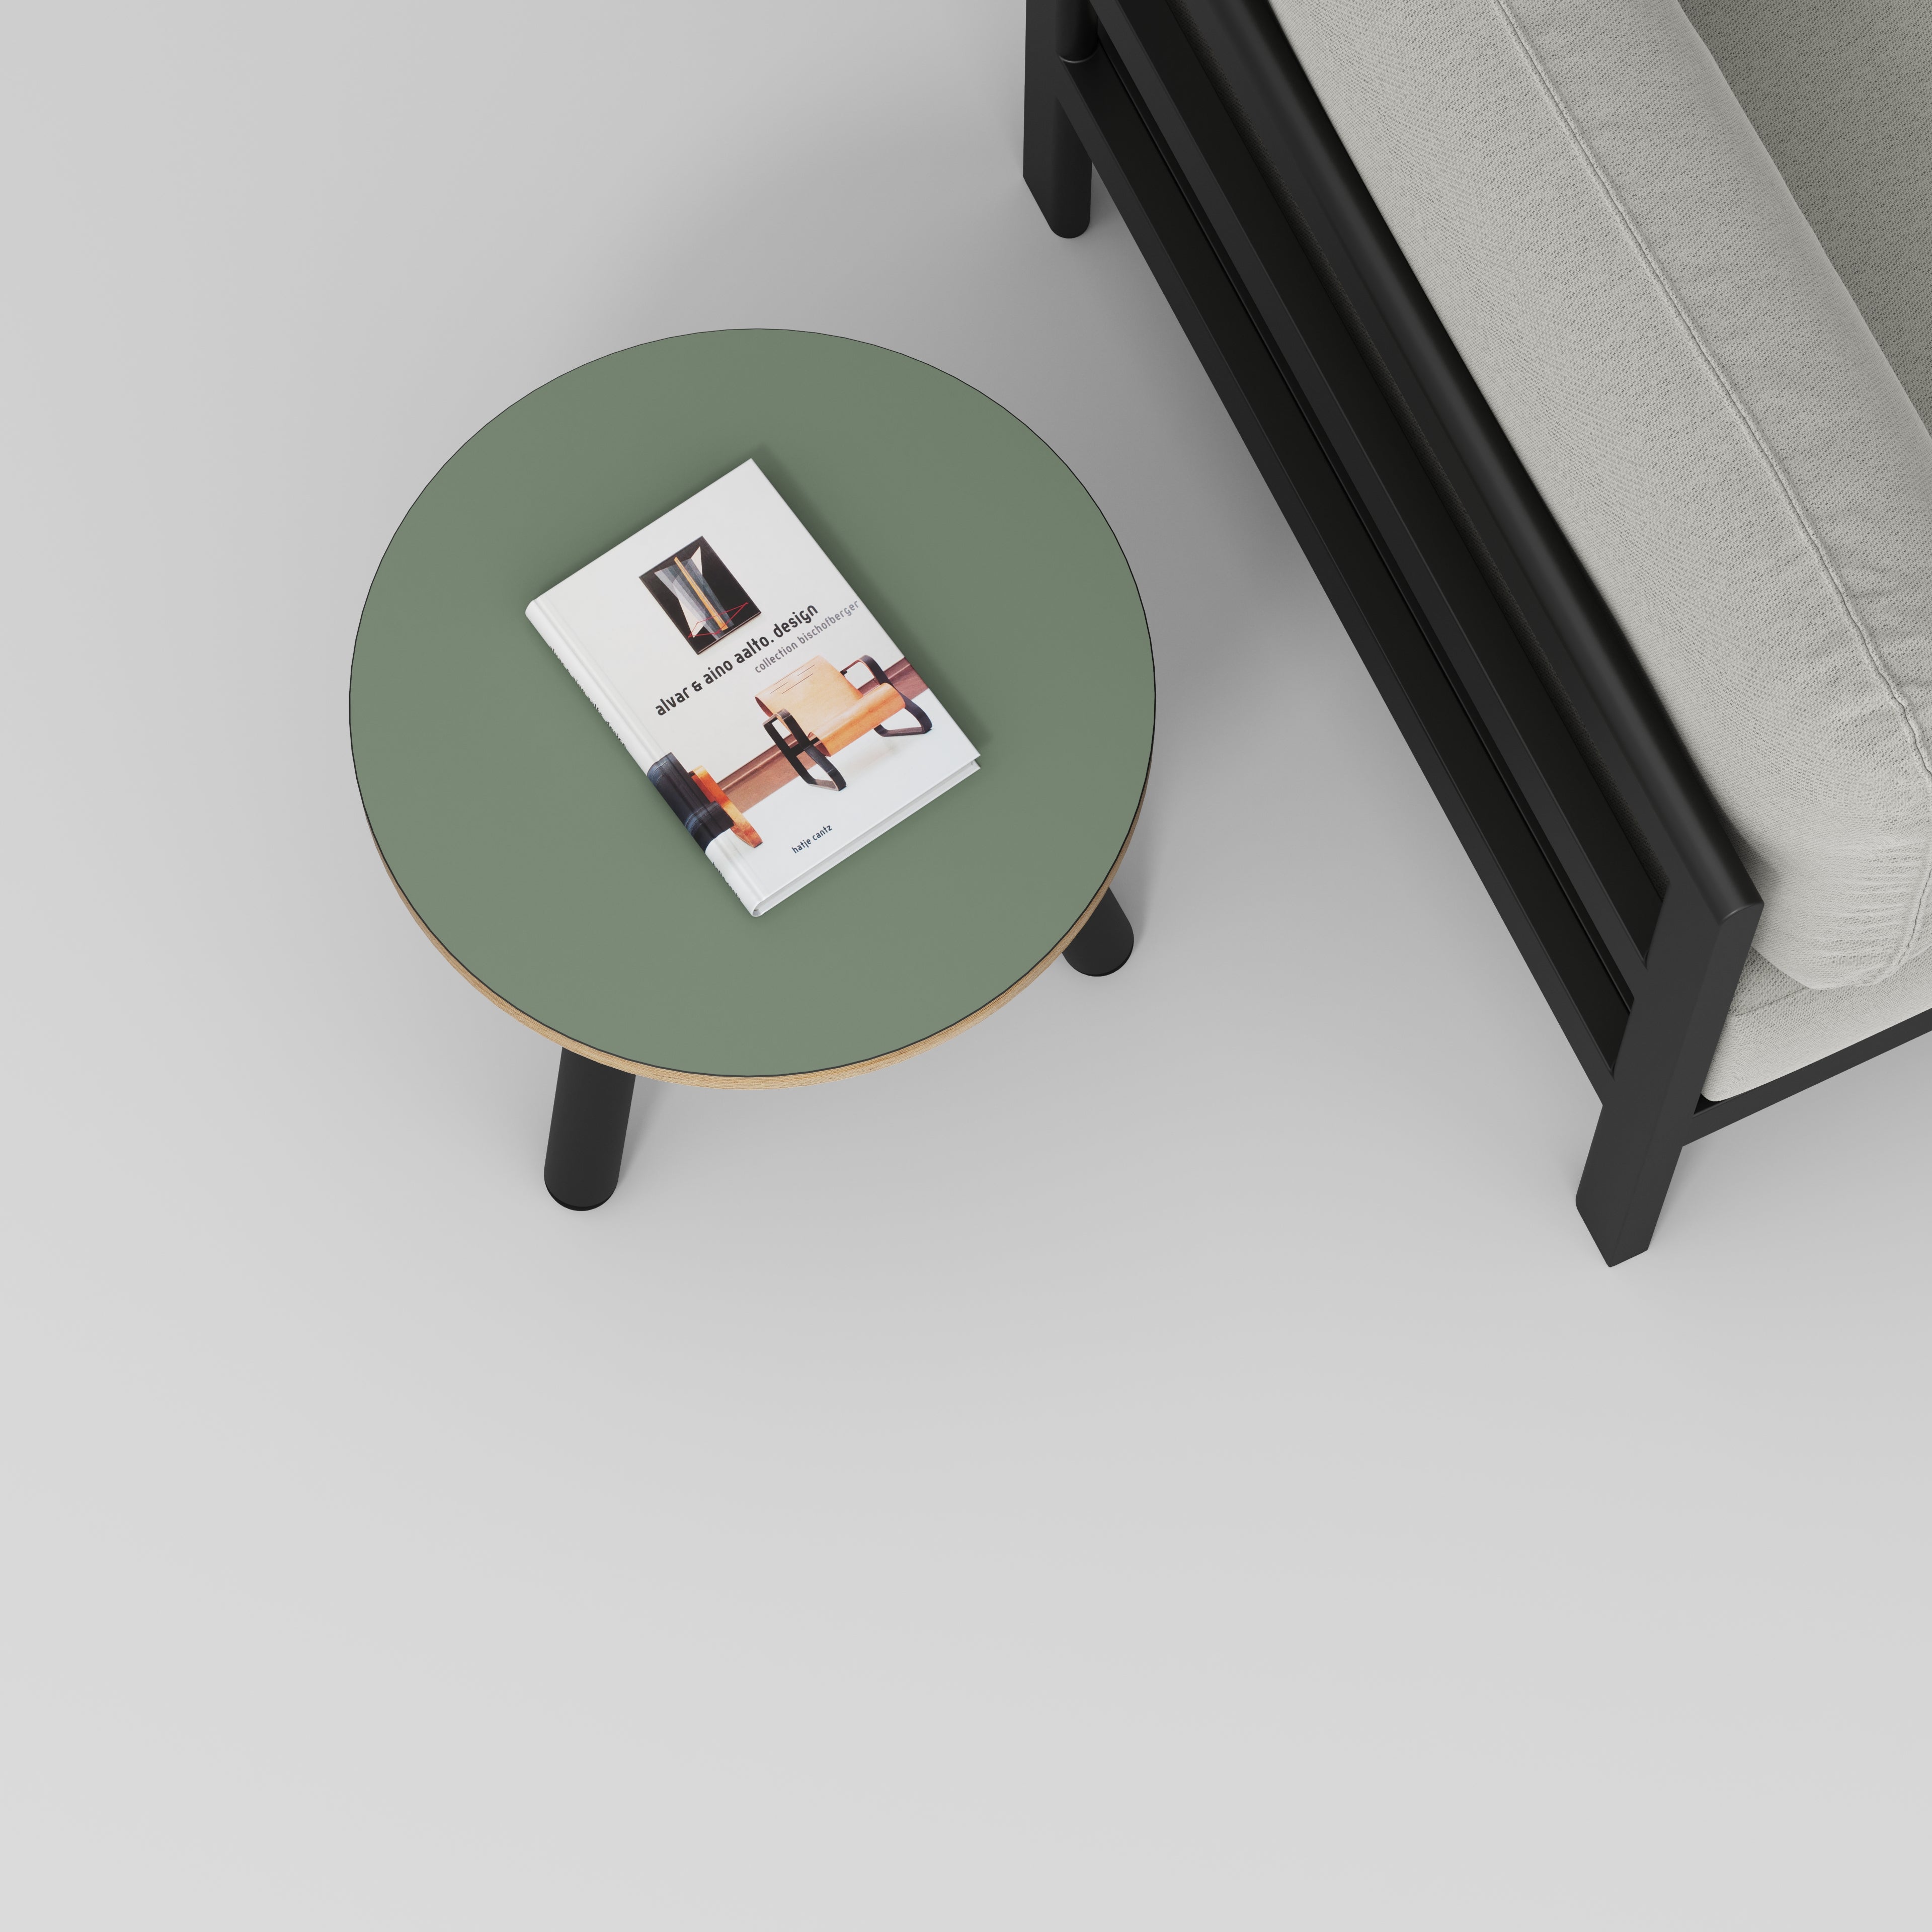 Round Side Table with Black Round Single Pin Legs - Formica Green Slate - 500(w) x 500(d) x 425(h)